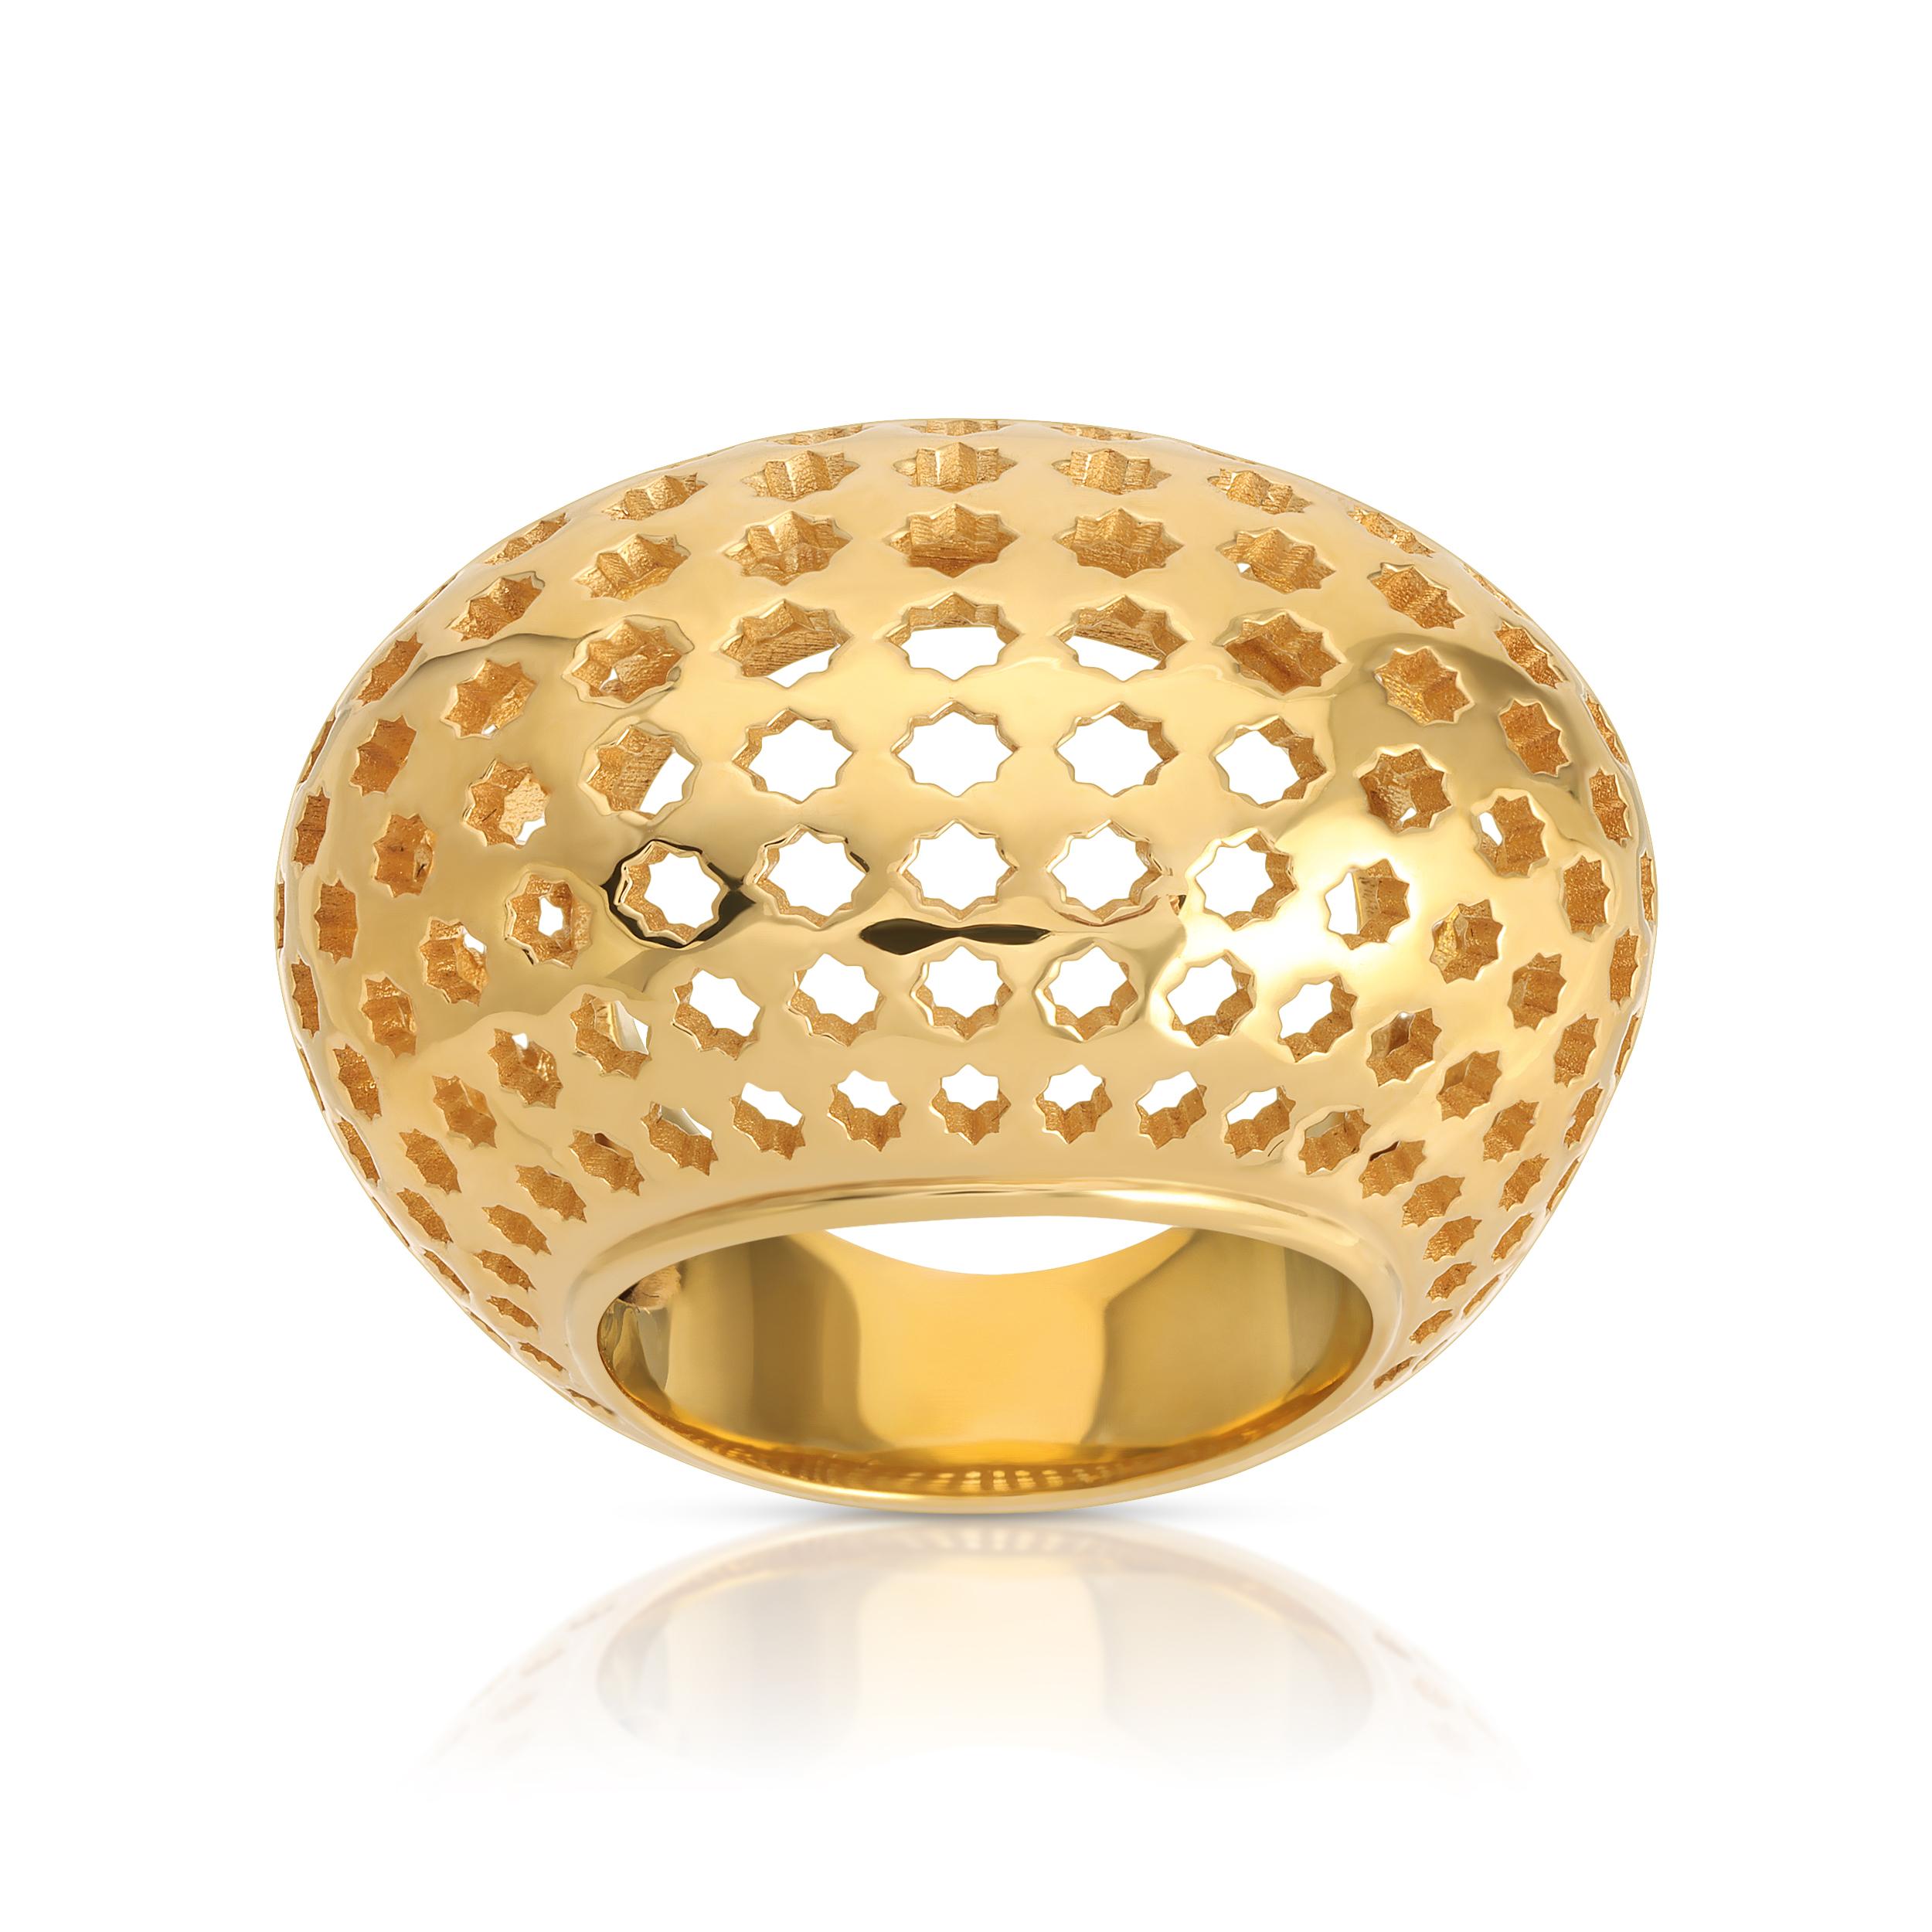 Looking for a bold and eye-catching ring that's also comfortable to wear? Check out the Noor Ring! The unique design features a single pattern that is repeated throughout, creating a stunning optical effect. Whether you're dressing up for a special